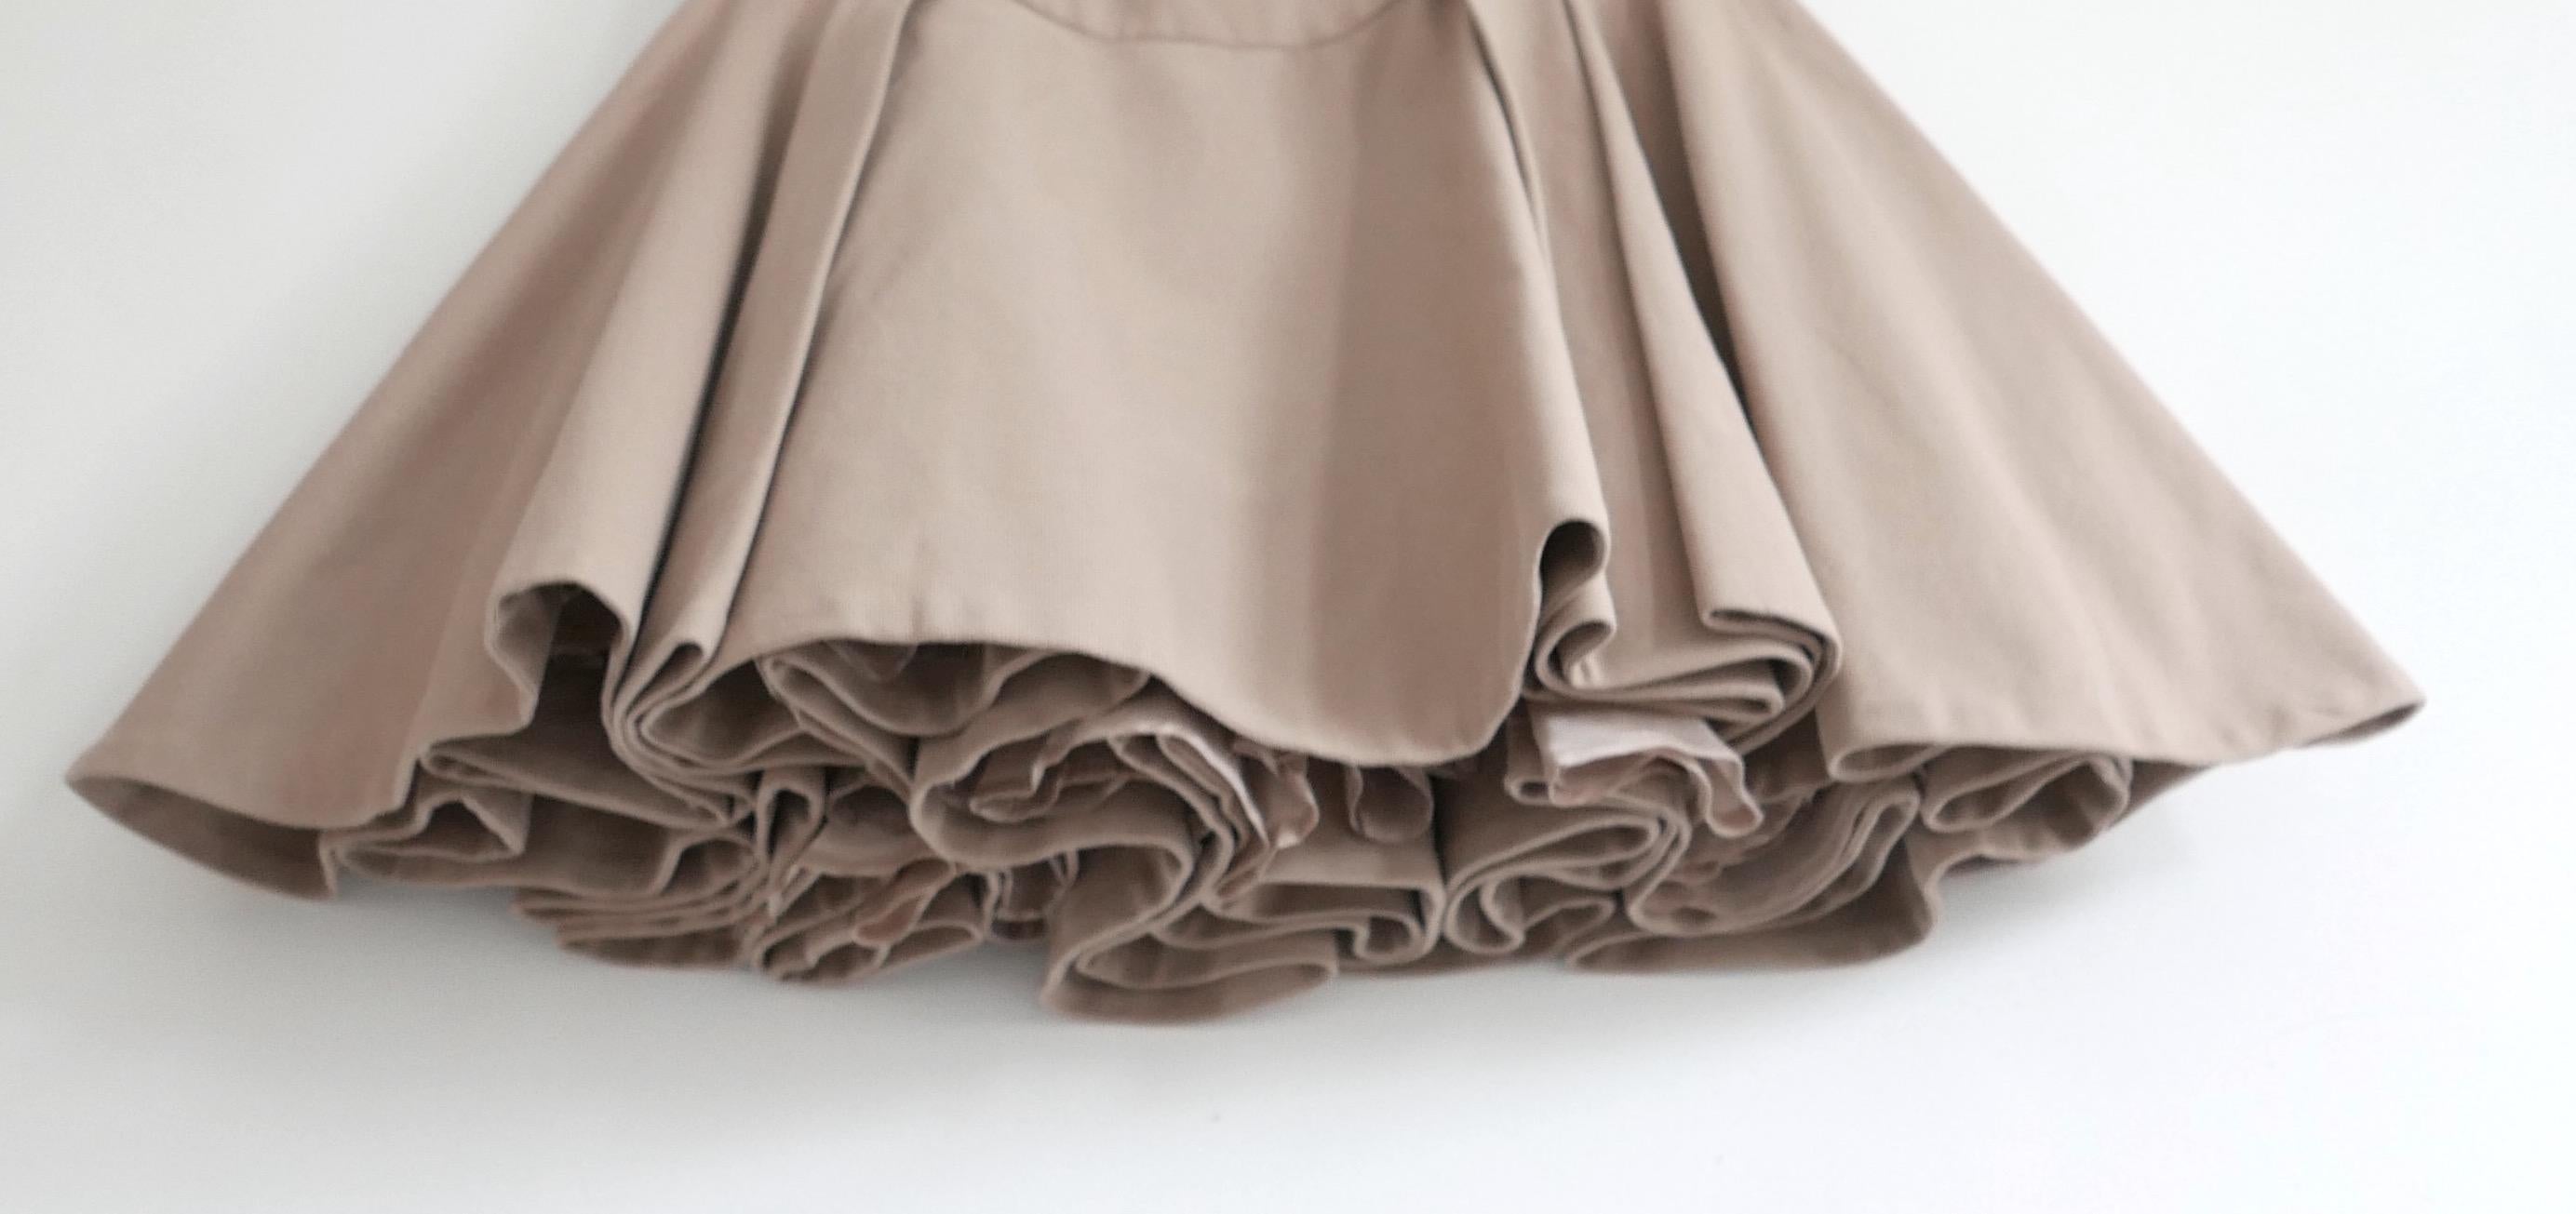 Stunning archival Alexander McQueen  super flared skirt from the Pre-Fall 2011 collection. Worn once. Made from heavy camel coloured cotton and elastane twill, it has a superbly cut super full, multi fold skirt with boned cincher waist. Moves